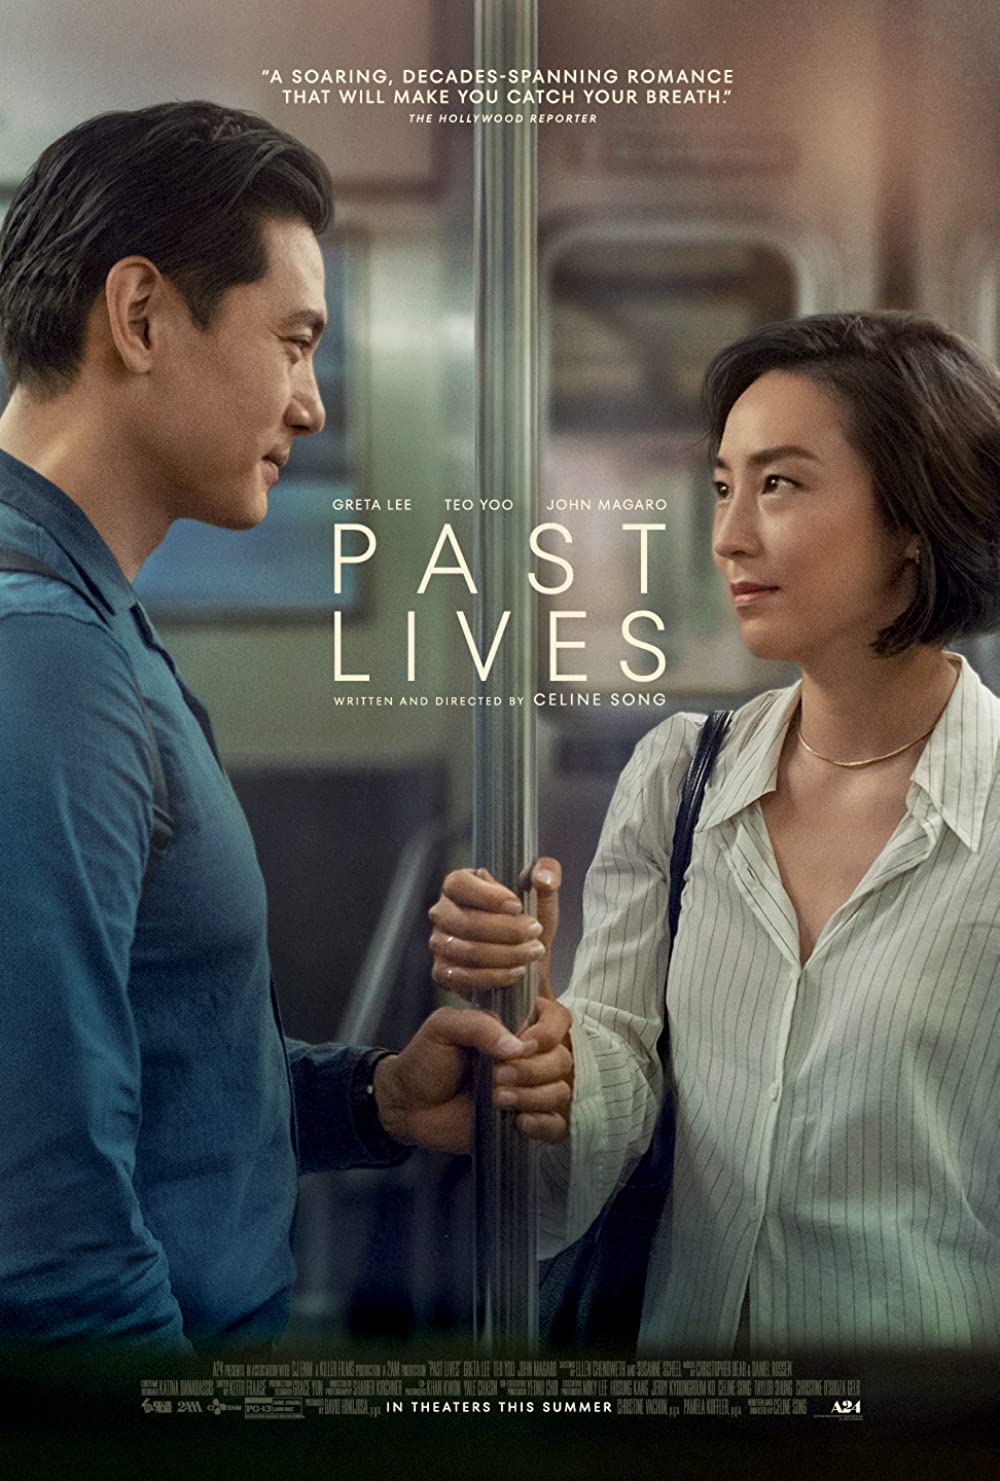 ‘Past Lives’ Set to Stir Indian Audiences with Acclaimed Romance